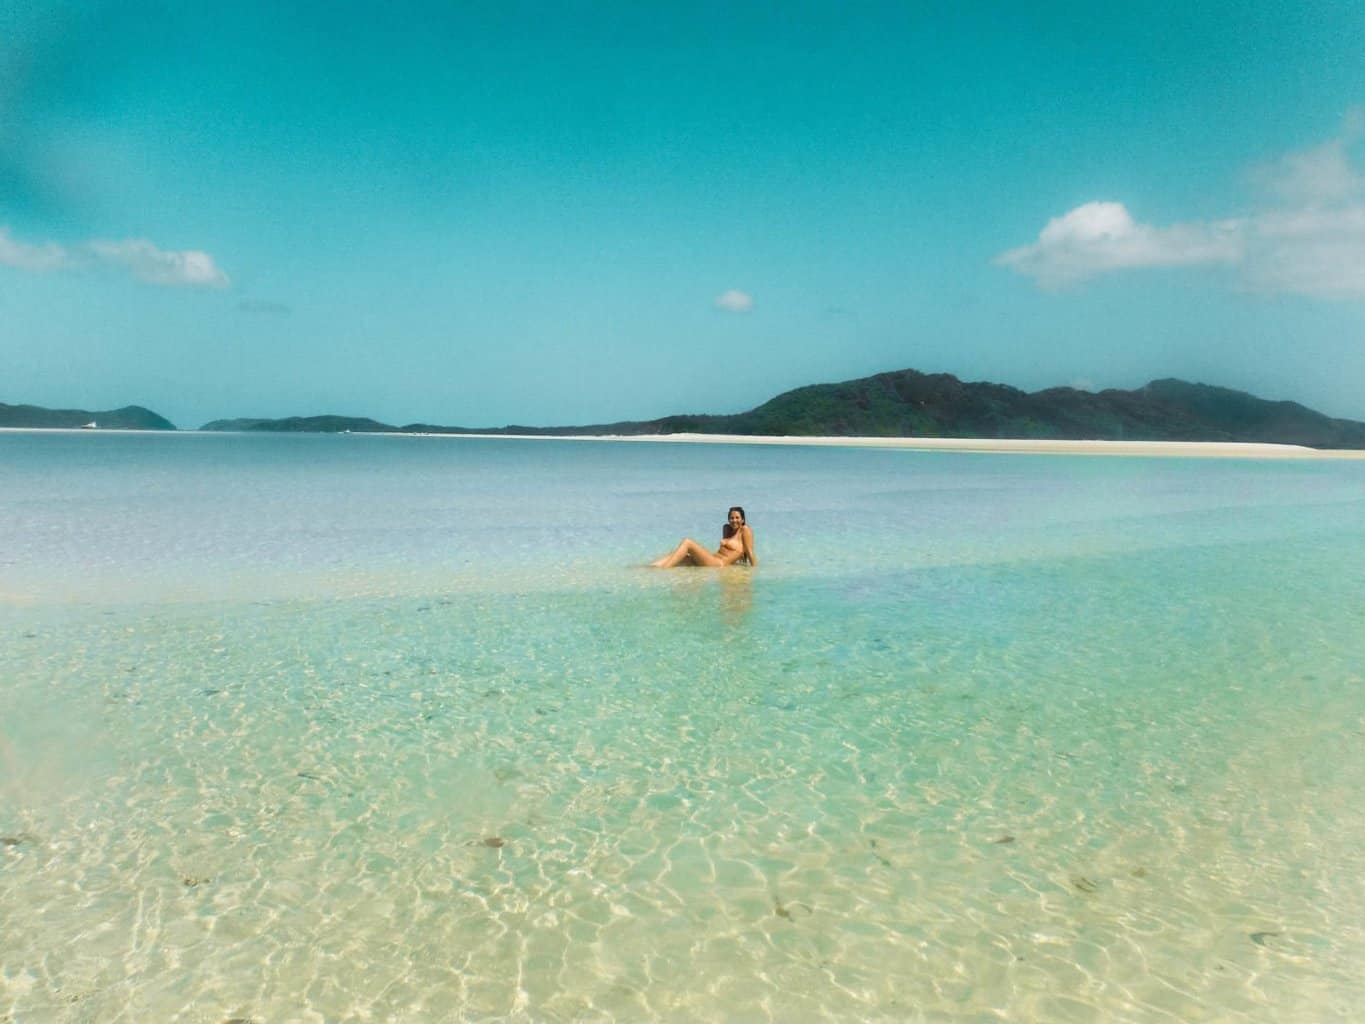 Bathing in the calm waters of The Whitsundays